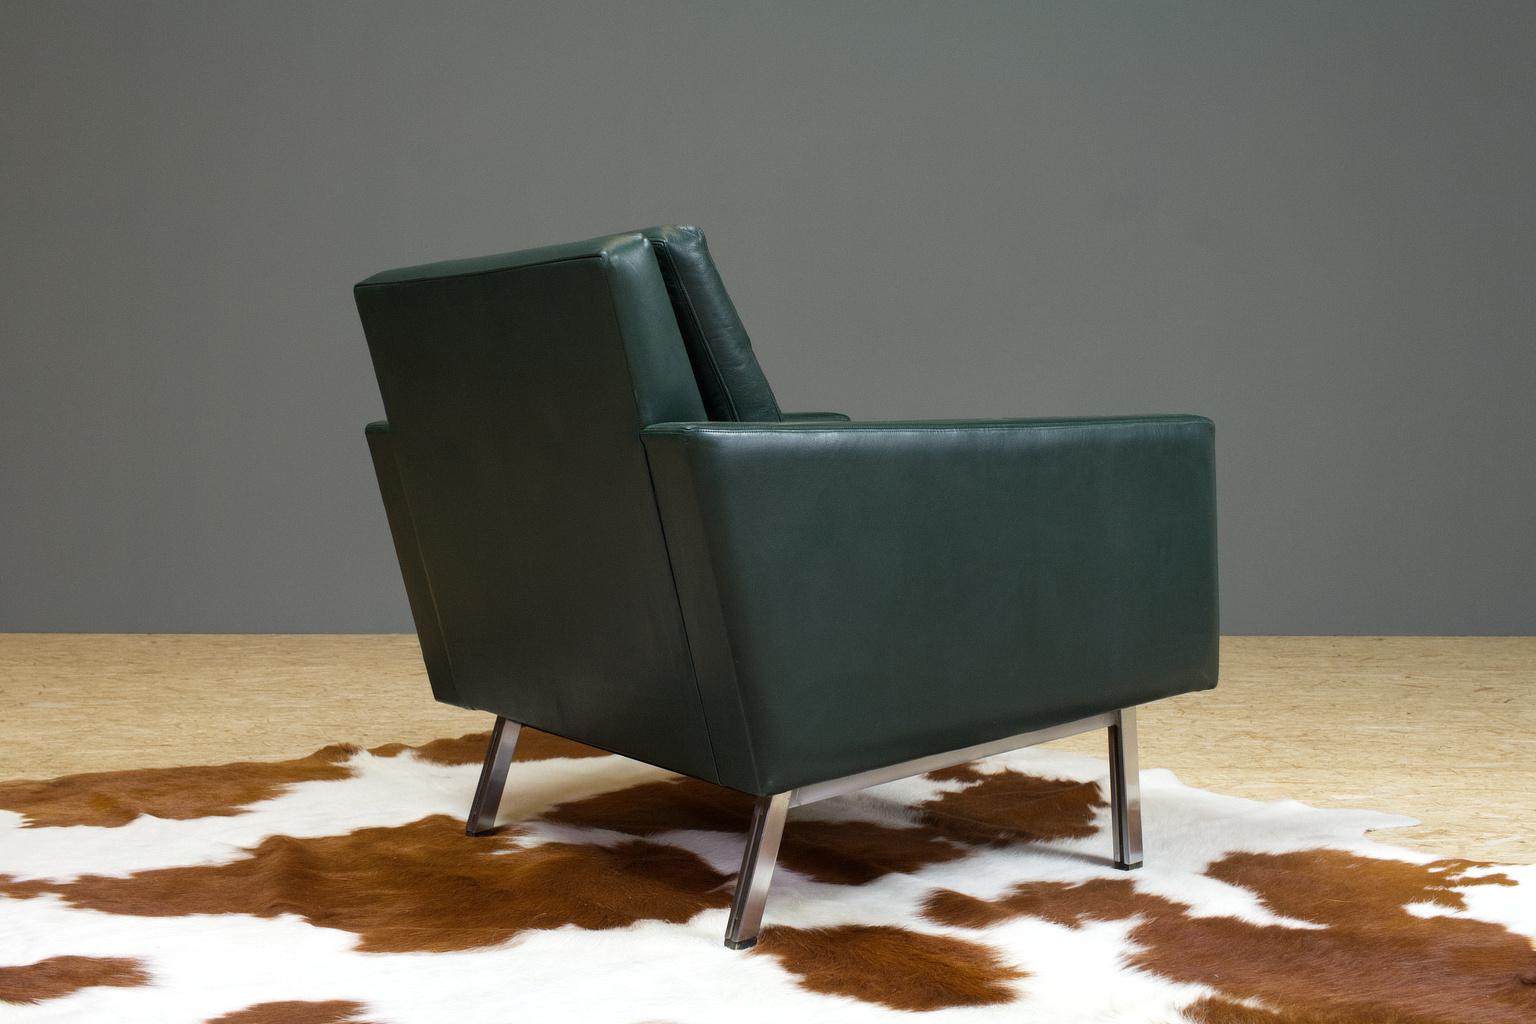 Mid-20th Century Vintage Green Leather Cubic Lounge Chair by Hein Salomonson, 1960s Dutch Design